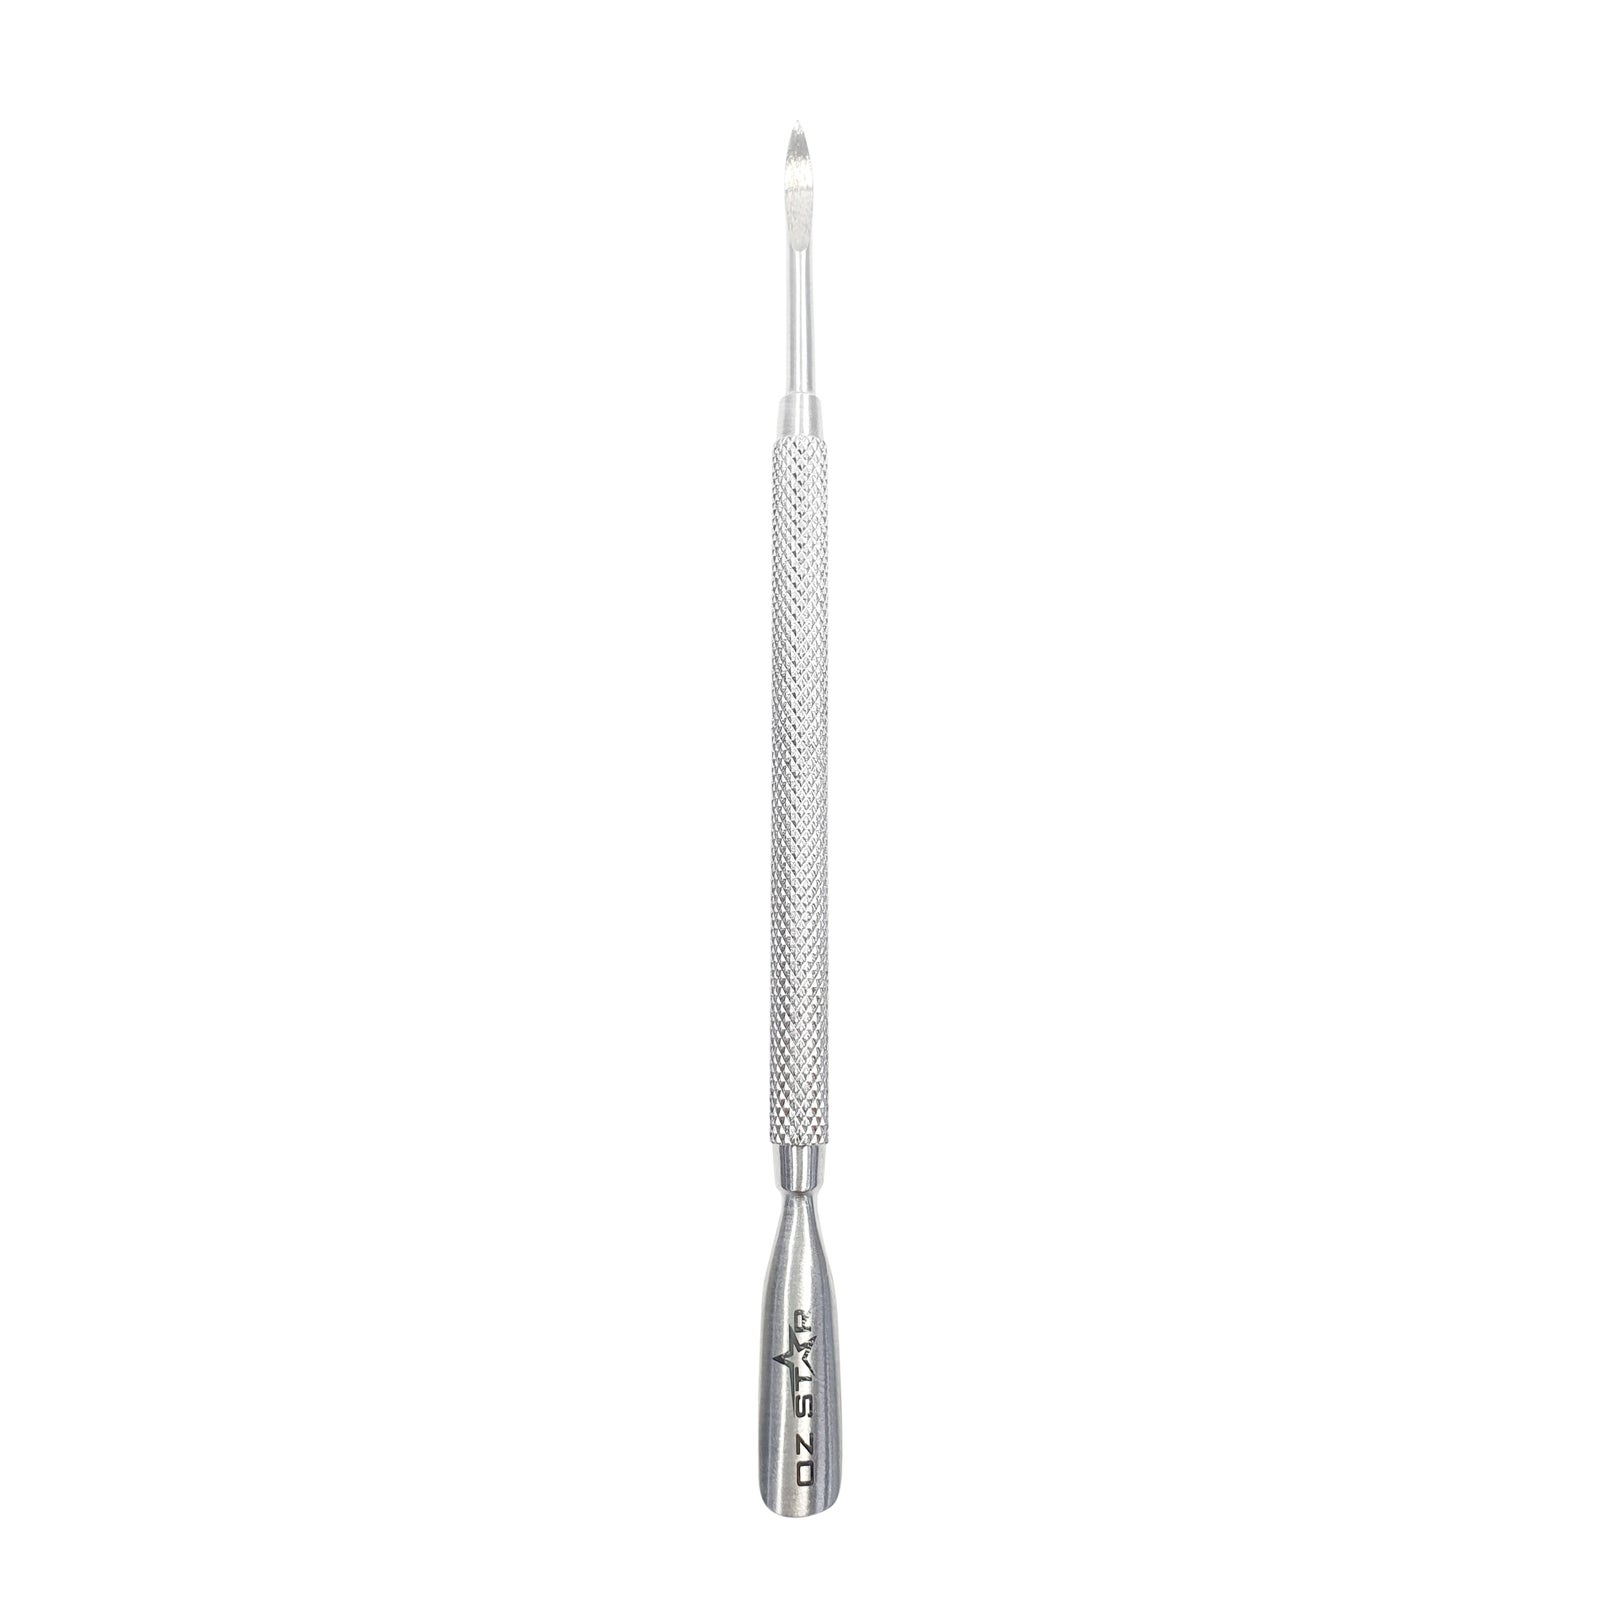 Oz Star Stainless Steel Nail Cuticle Pusher Double End Spoon Pointed Remove SNS